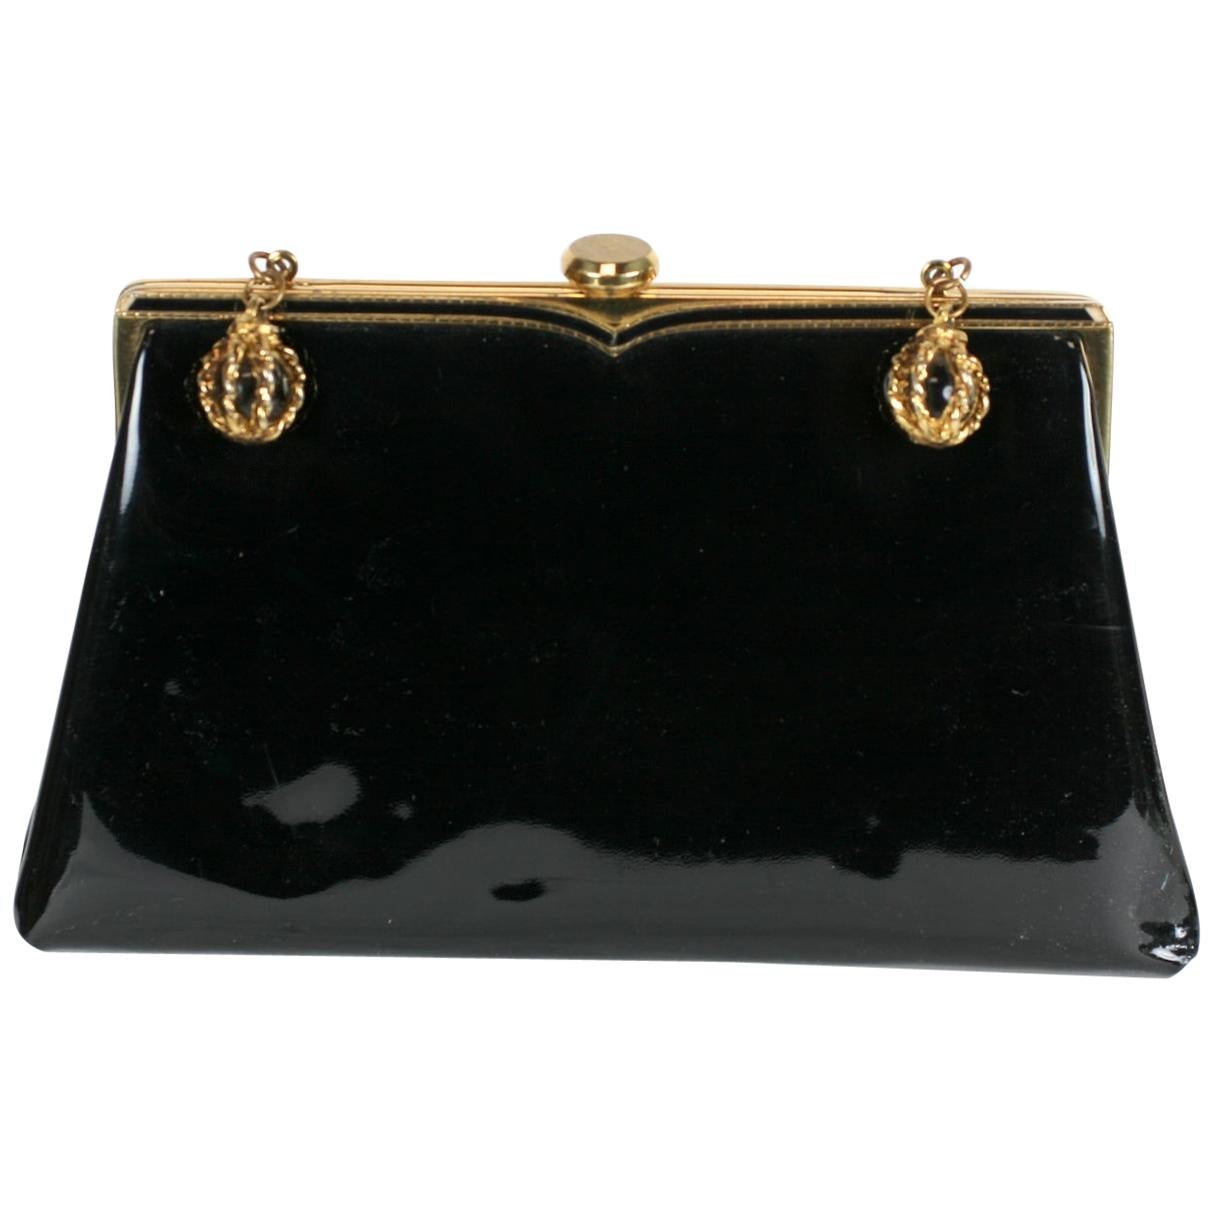 Coblentz Patent Clutch with Glass Orb Charms